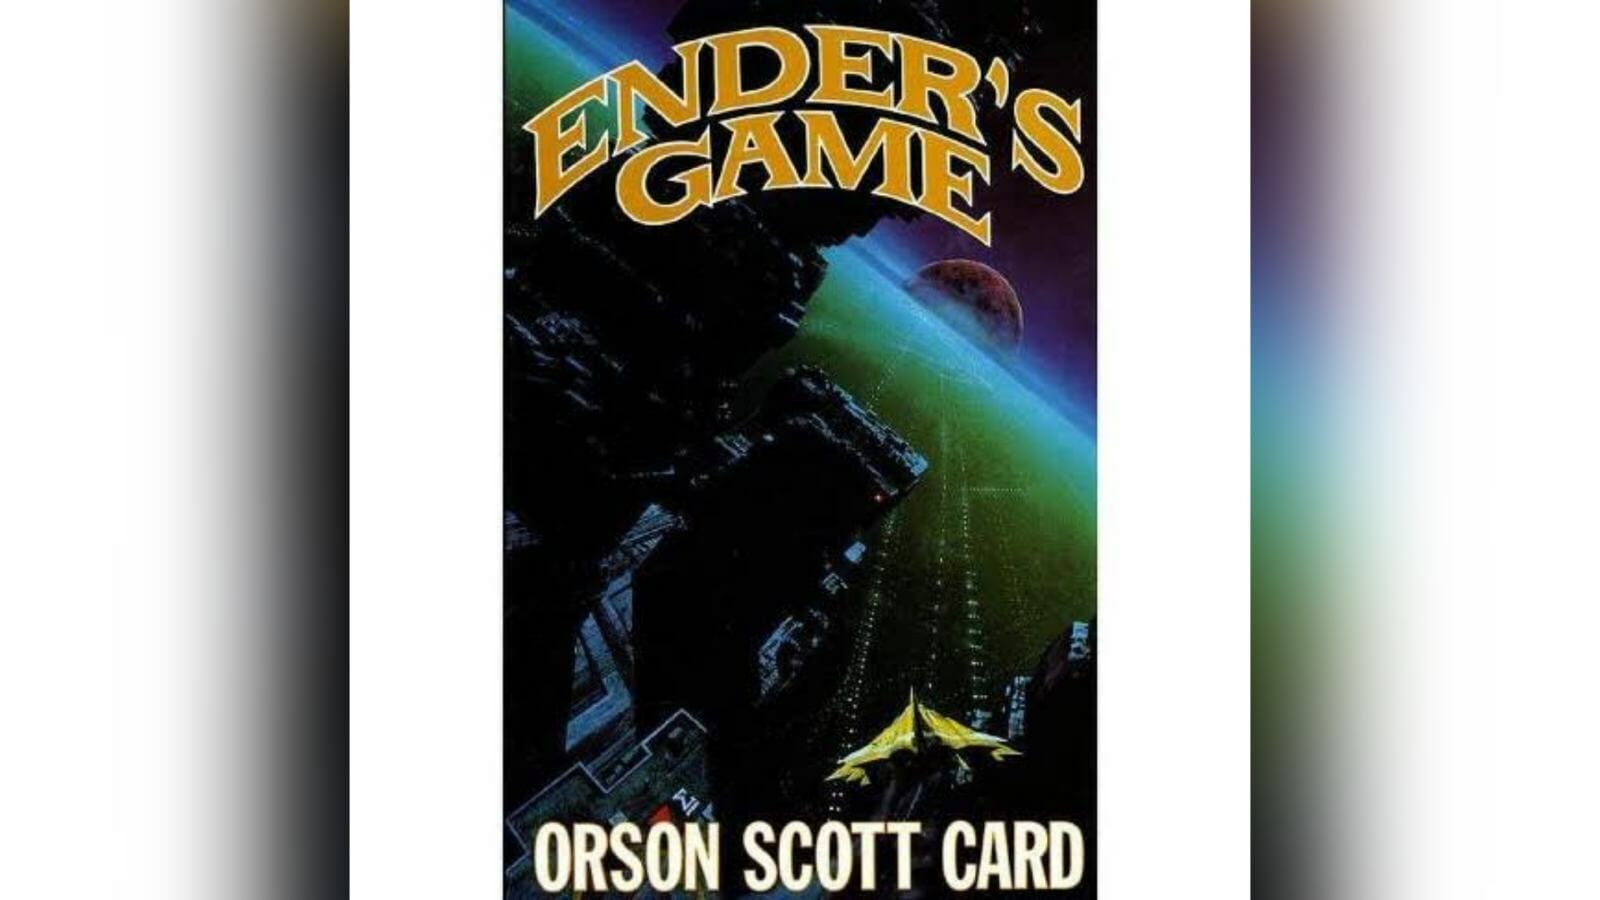 Ender's Games by Orson Scott Card